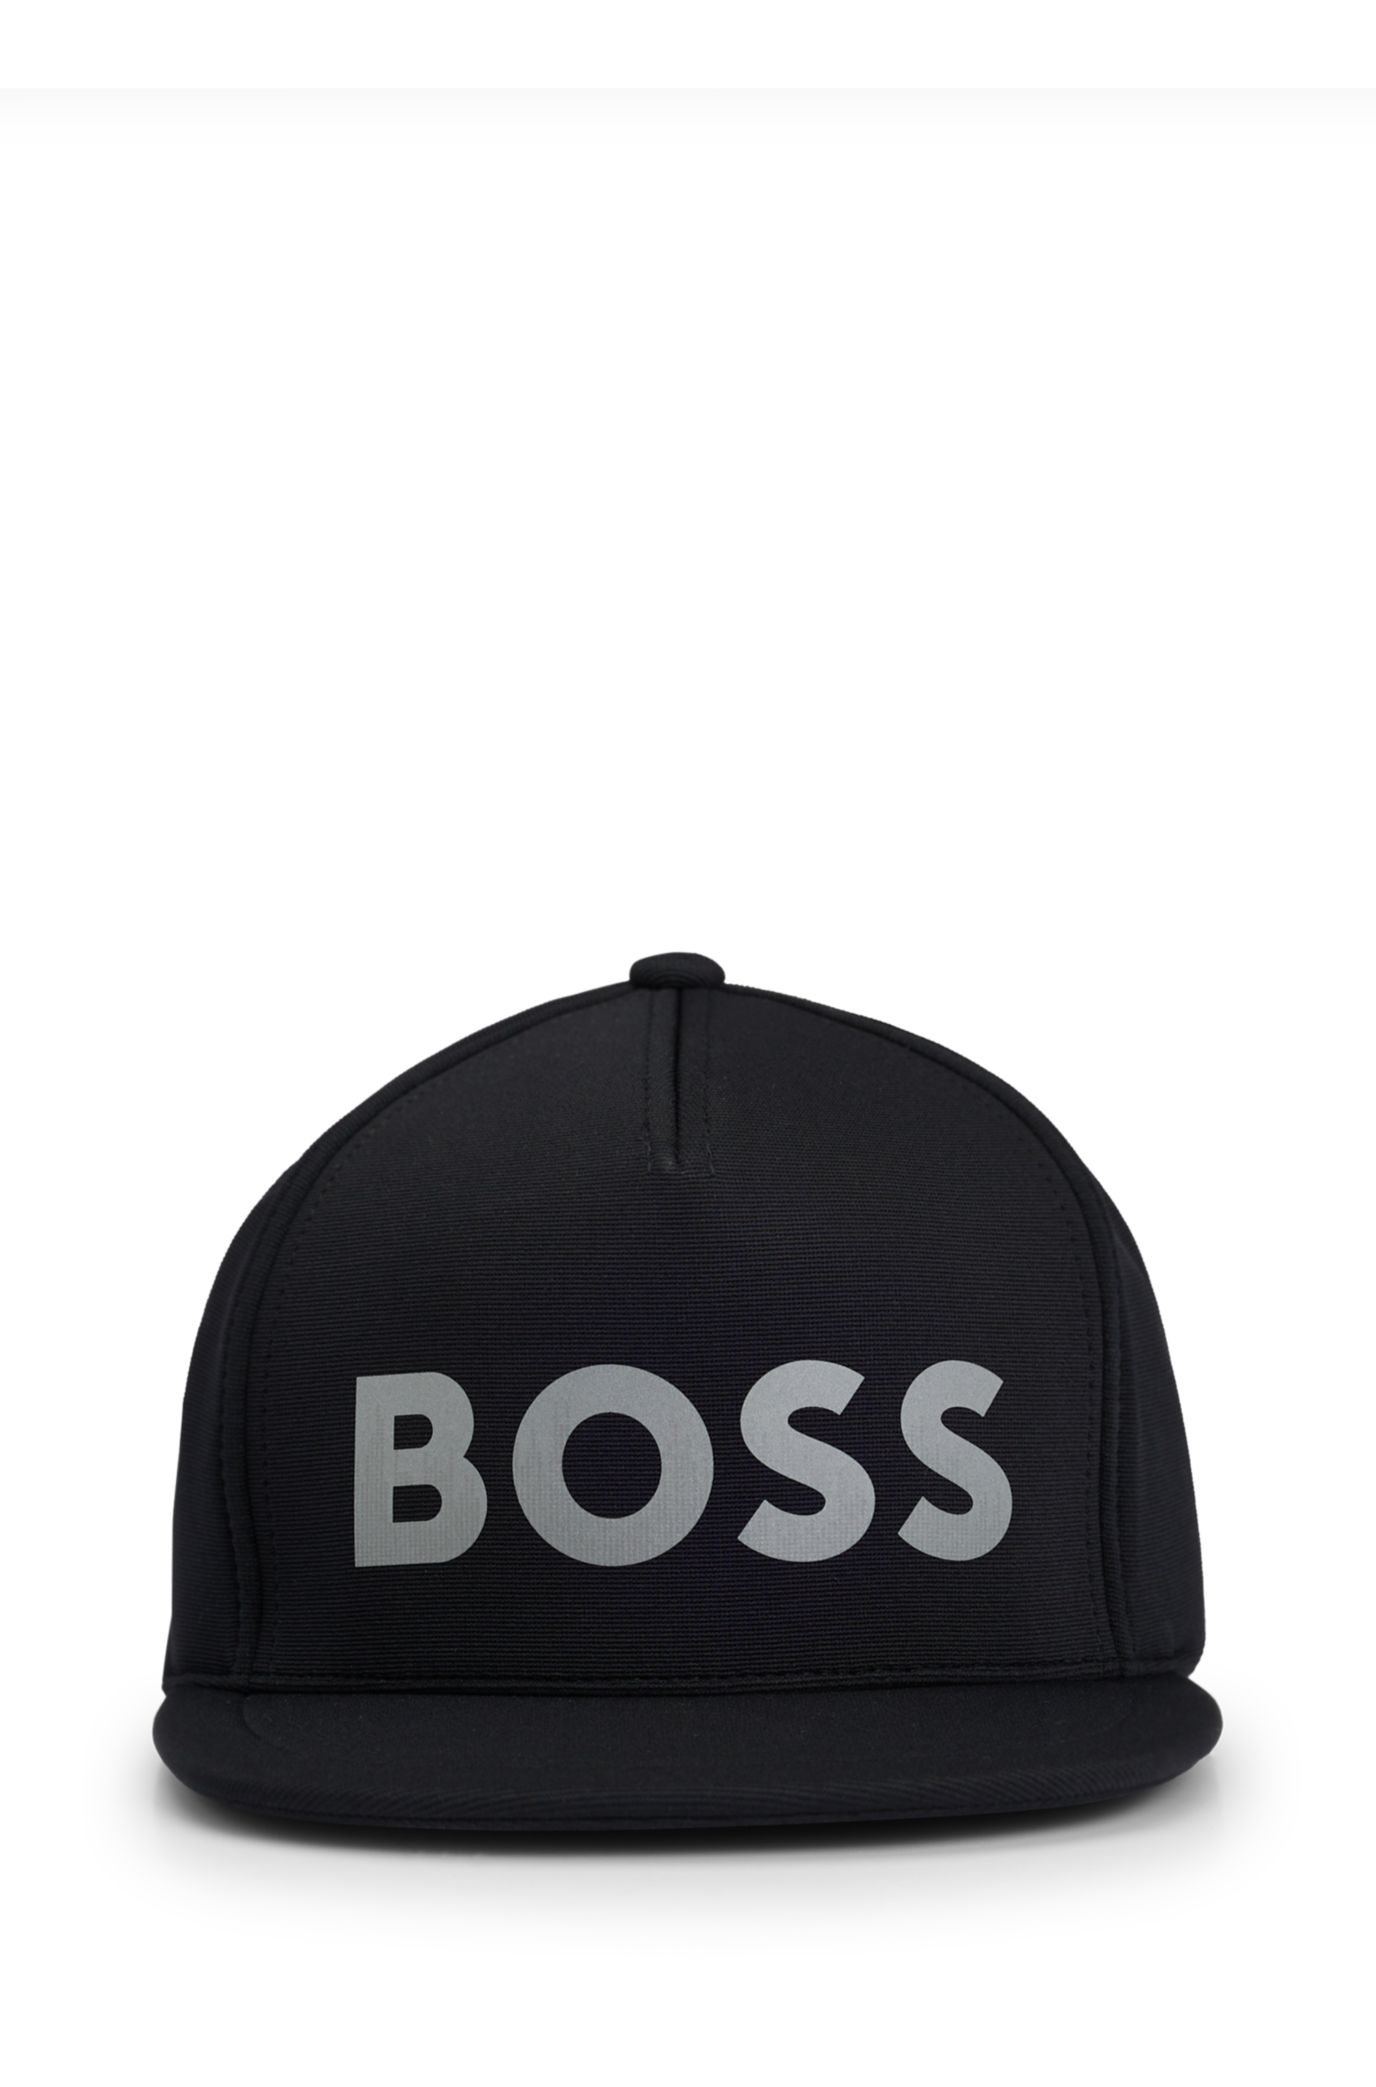 BOSS - Stretch-jersey with logo cap reflective decorative